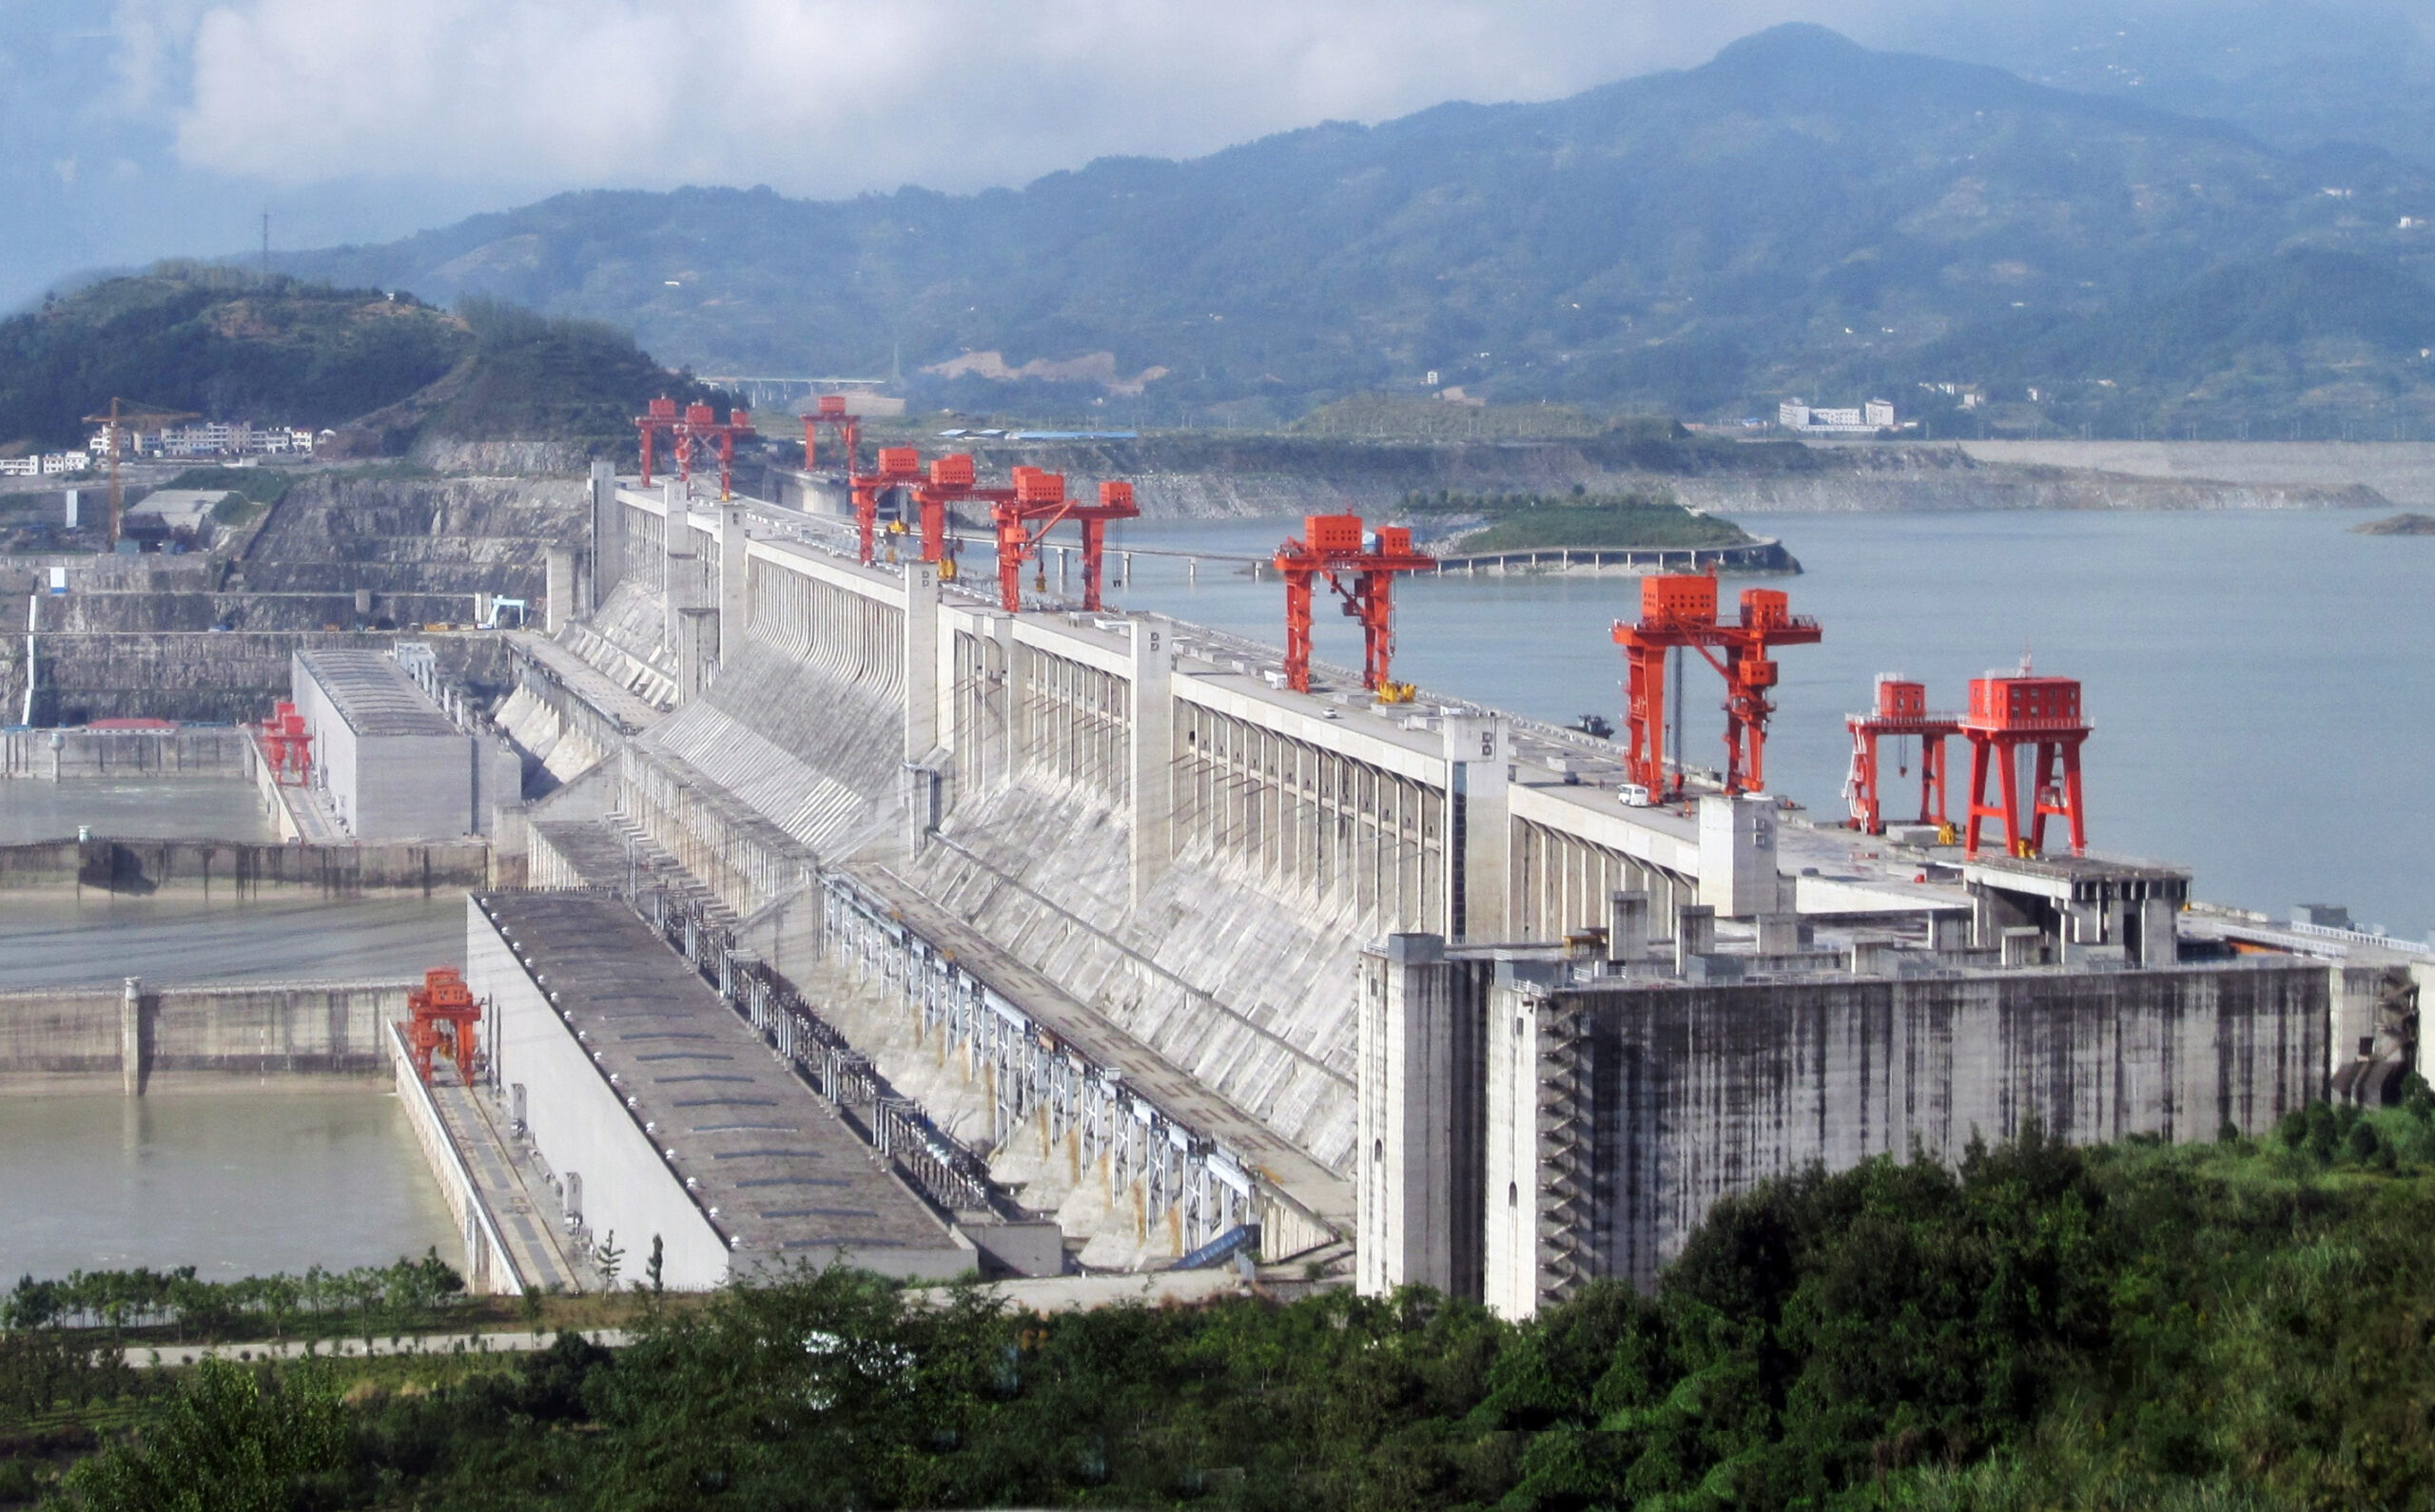 The reservoir of Three Gorges Dam in China can retain an amount of water voluminous enough to slow and change the rotation of the Earth.